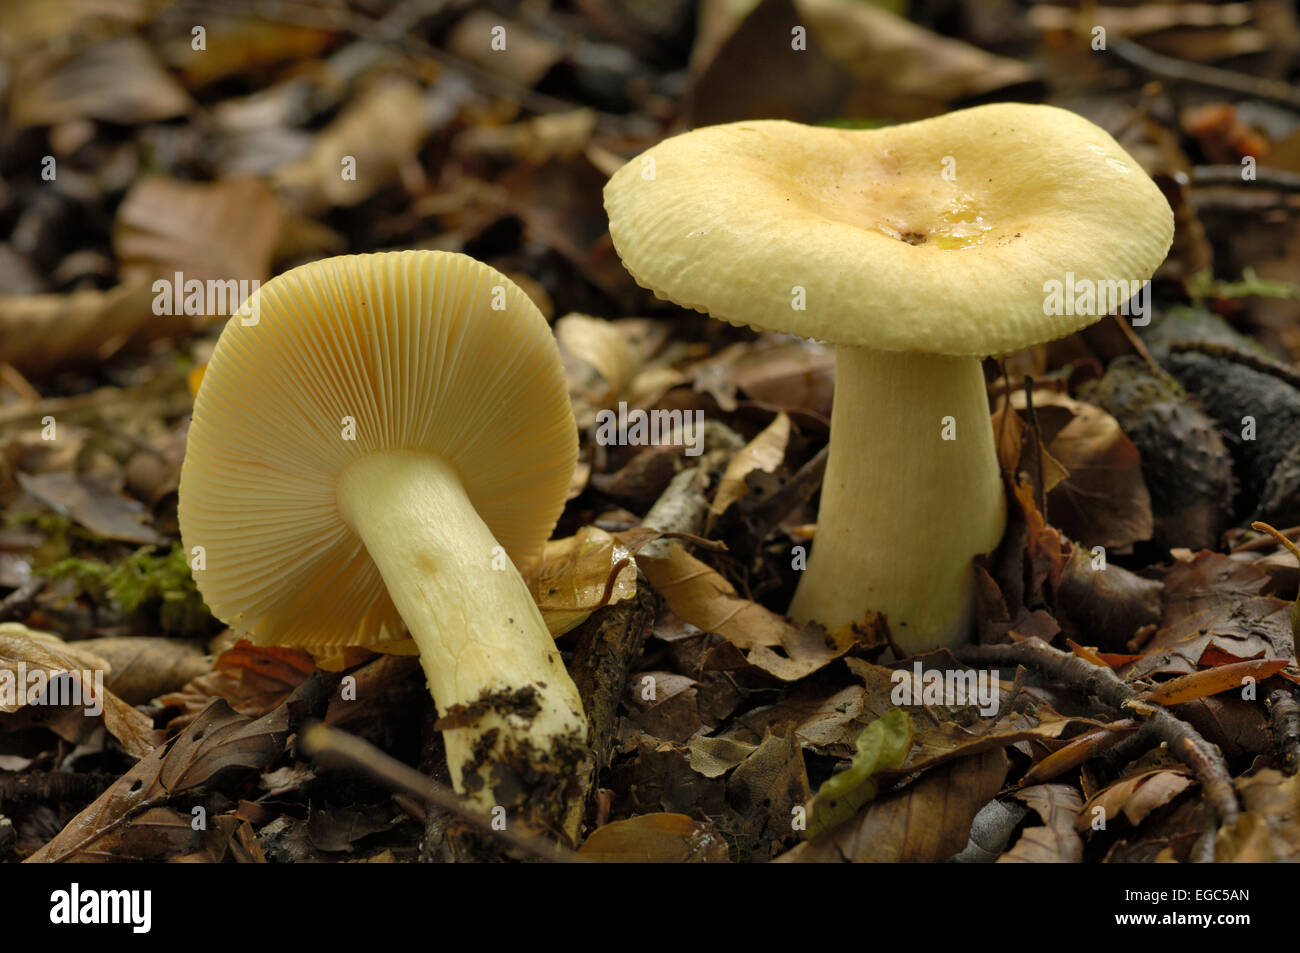 Fungi, Russula species, possibly Russula farinipes, seen growing on the ground under beech trees in deciduous woodland, Carstramon Wood, Dumfries & Galloway, Scotland Stock Photo